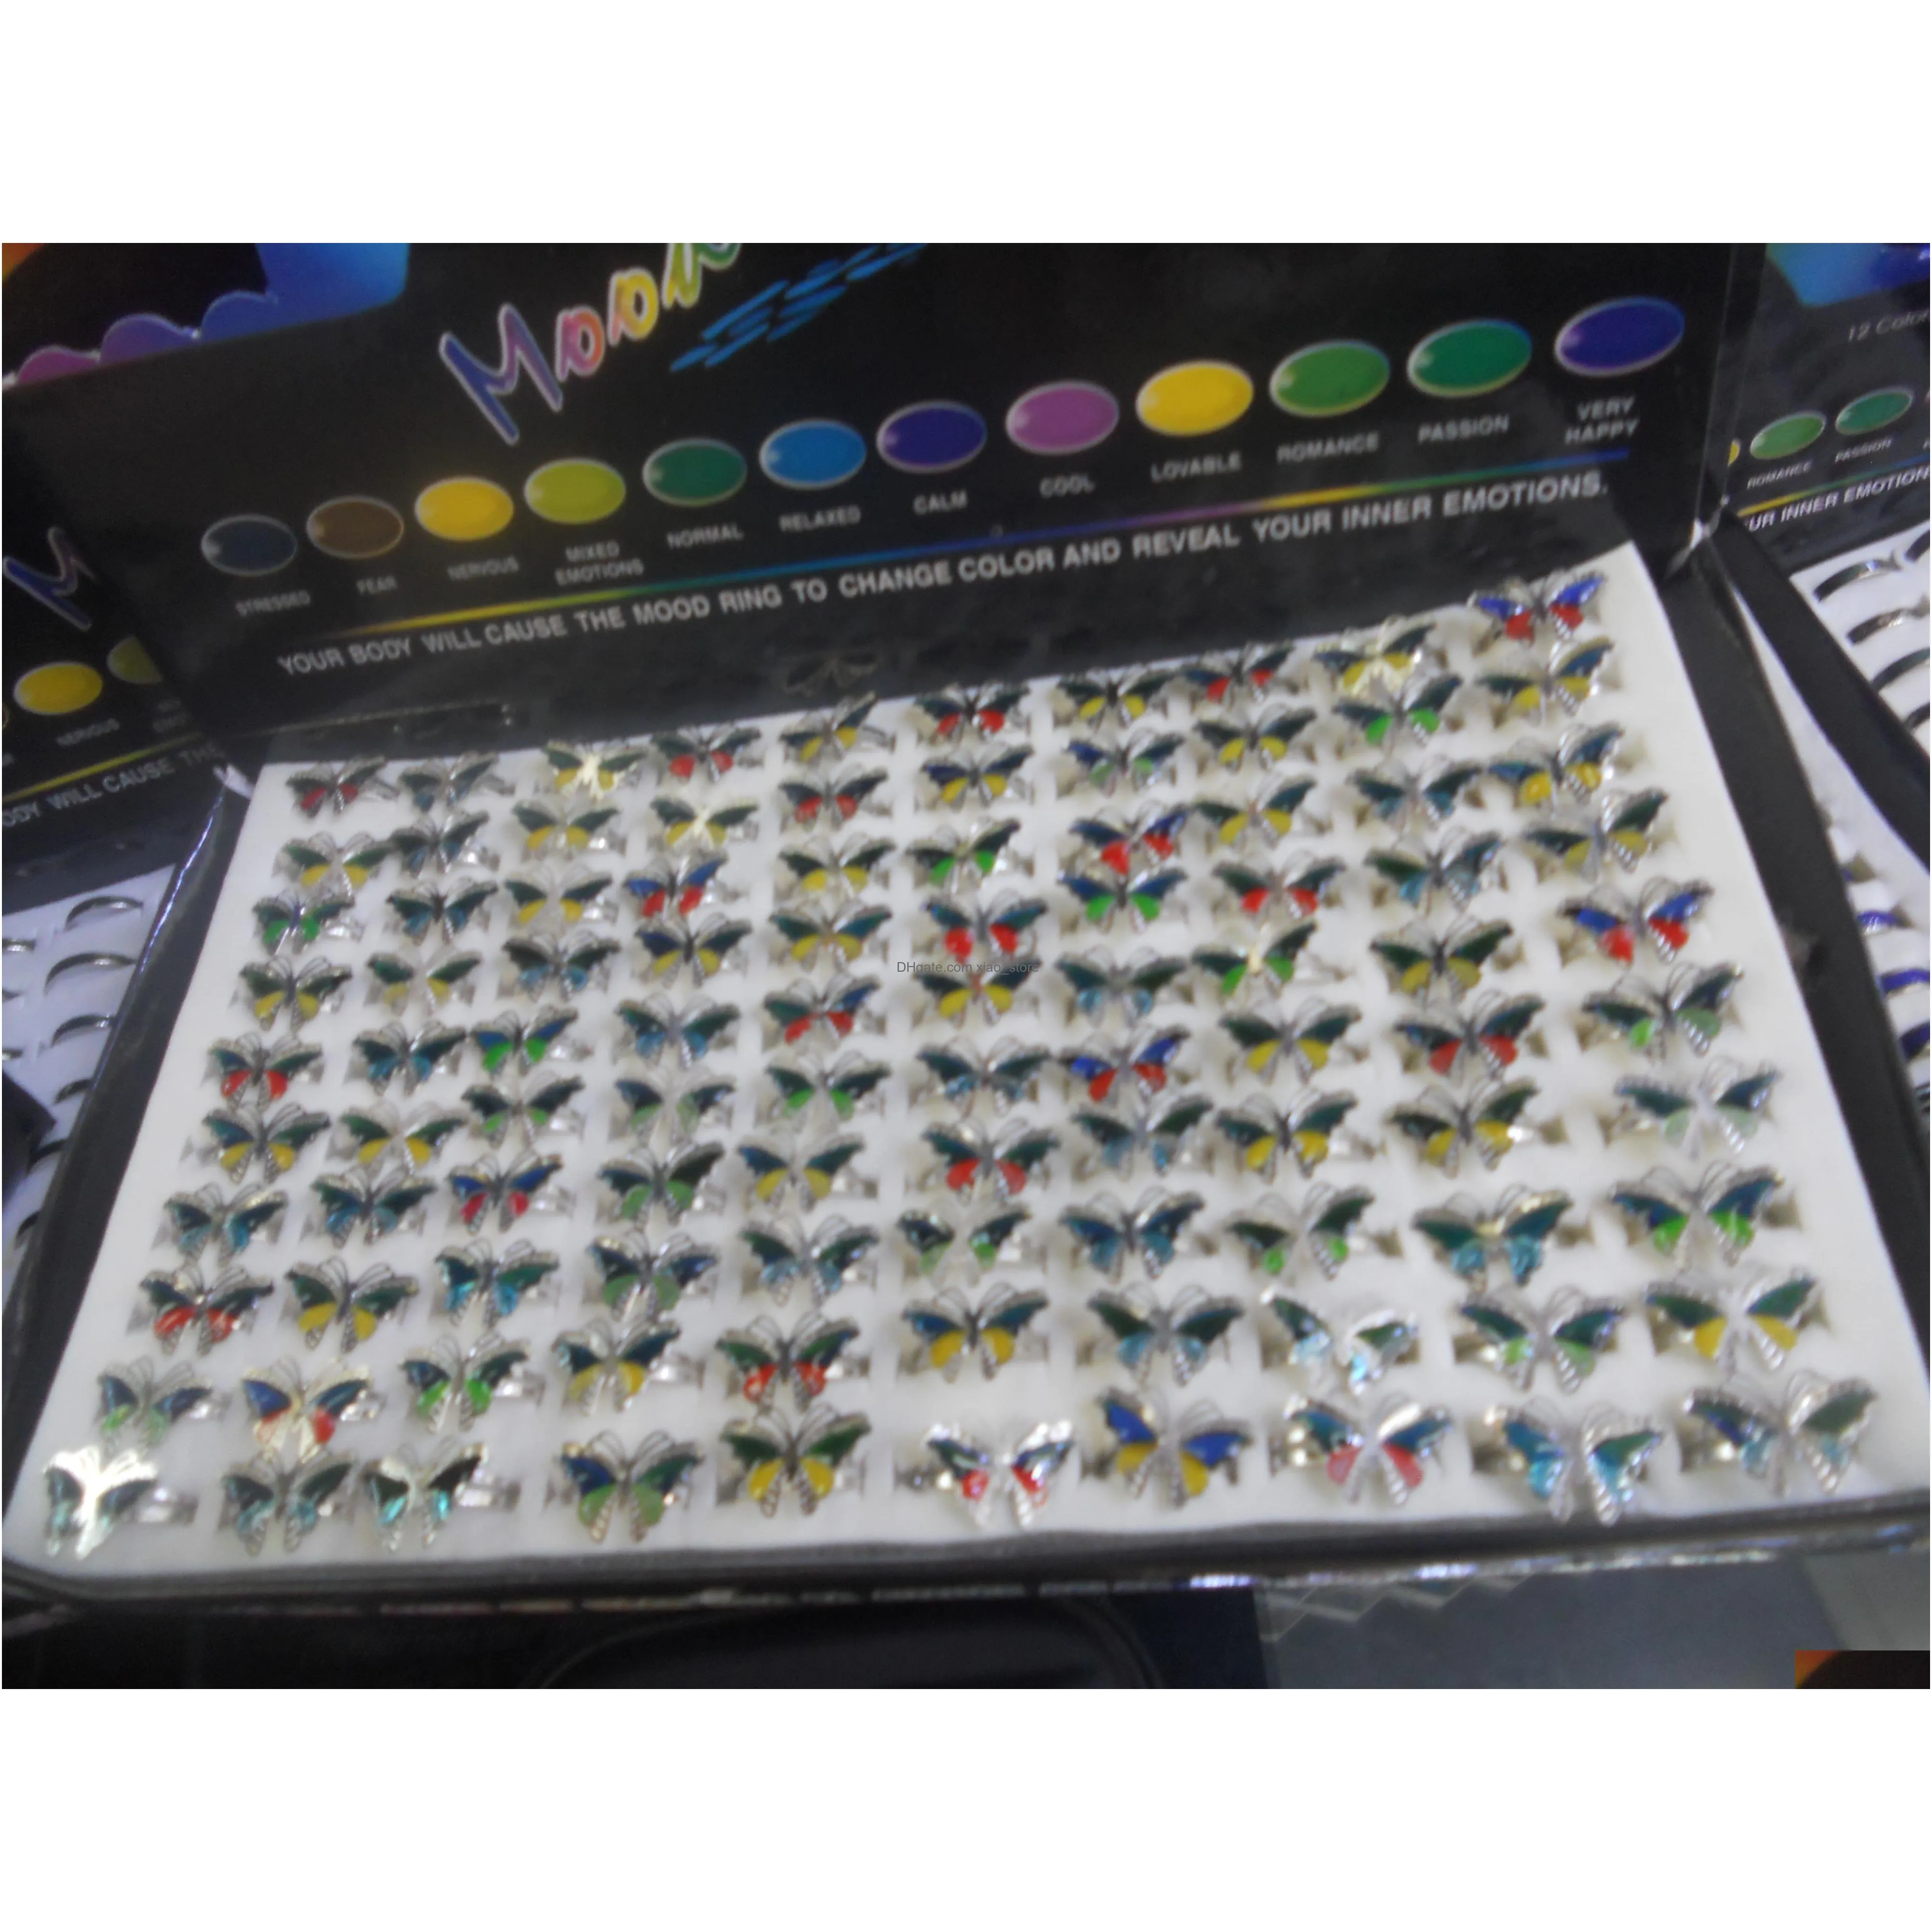 butterfly mood ring charming rings change color female